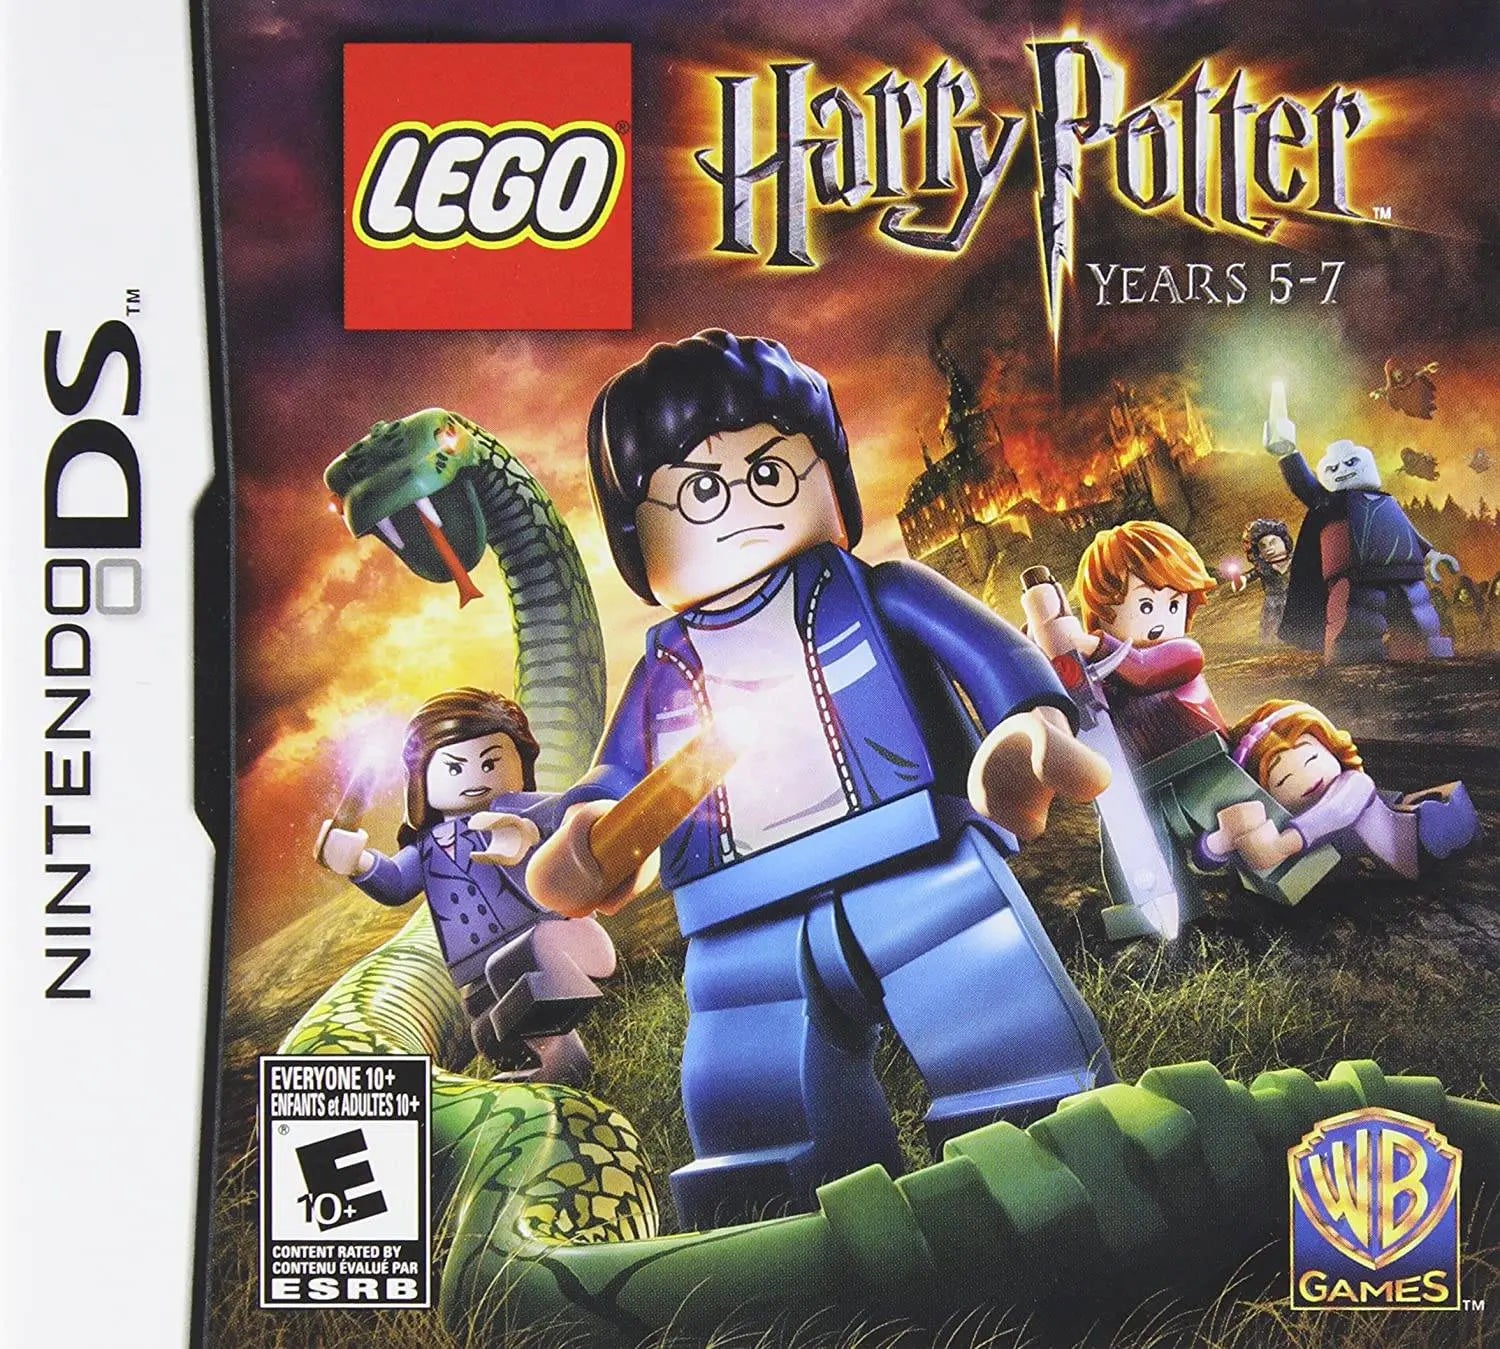 LEGO Harry Potter Years 5 - 7 - Nintendo DS - Used King Gaming